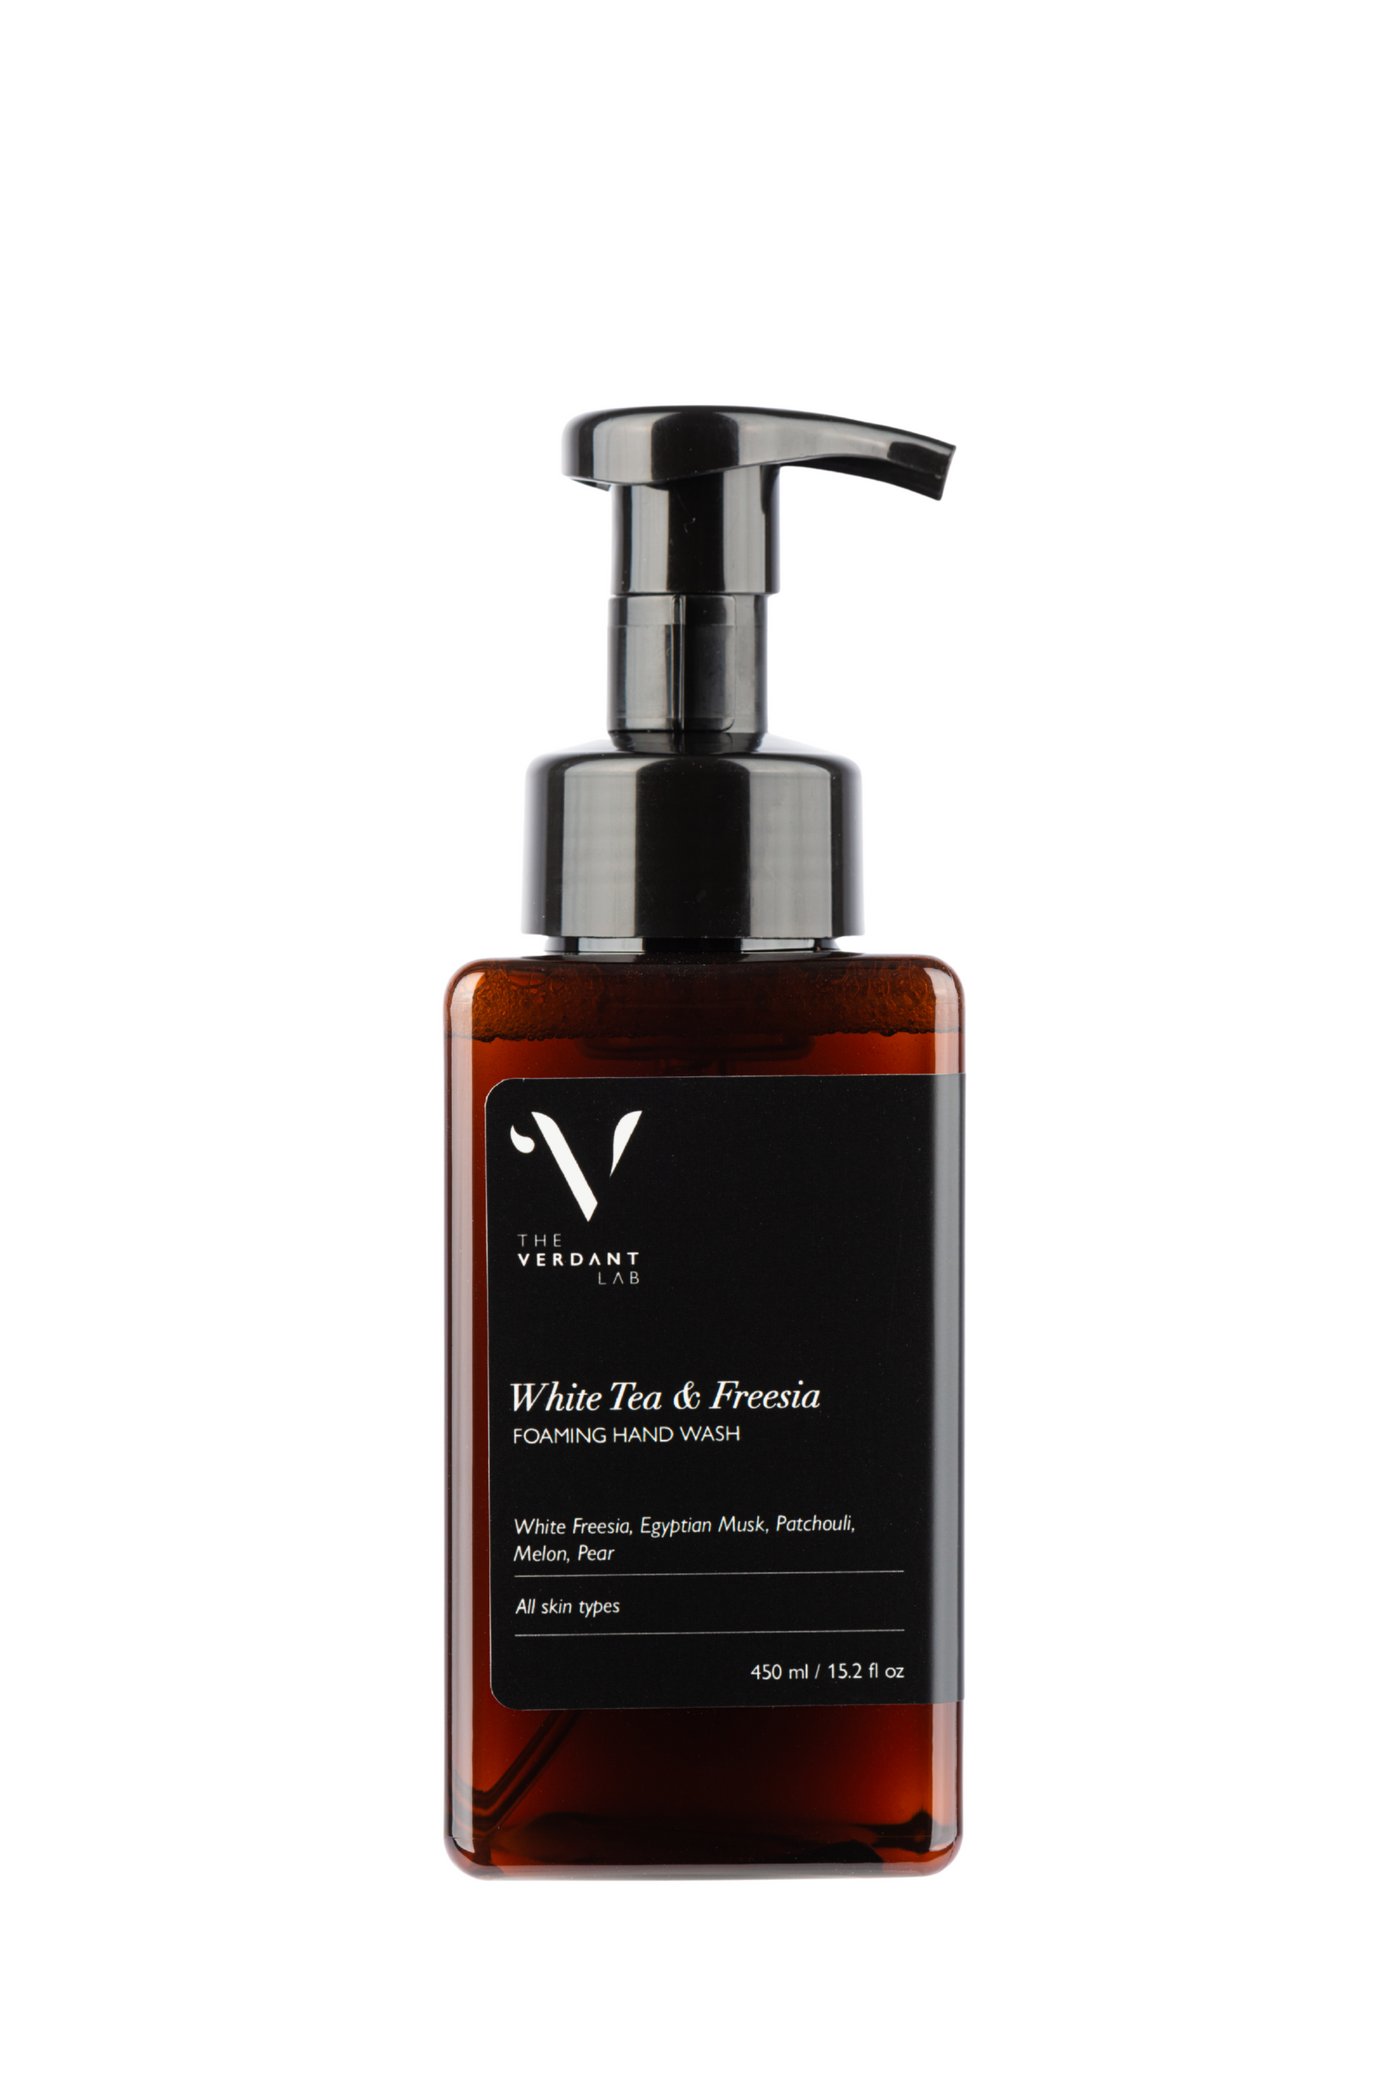 The Verdant Lab Foaming Hand Wash in White Tea & Freesia, available on ZERRIN